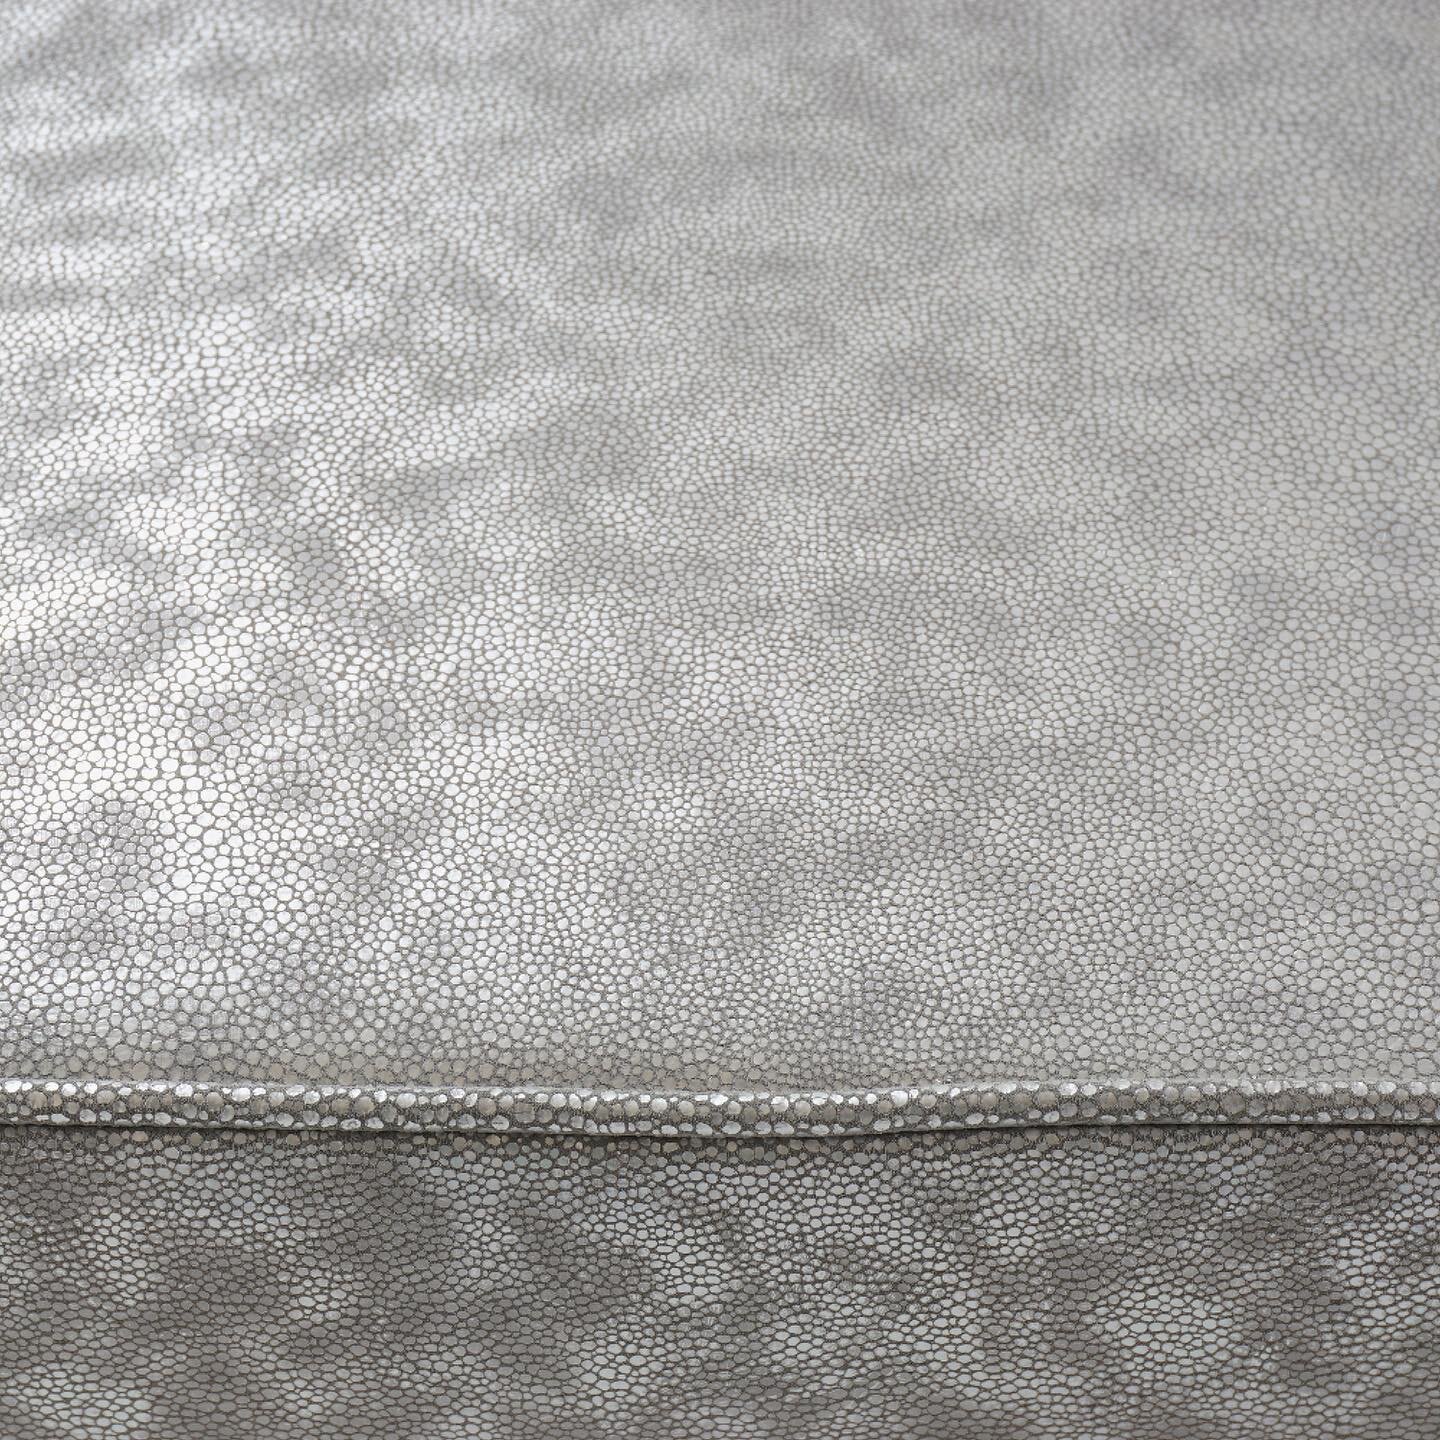 Reach out and feel this sueded &ldquo;Sharkskin&rdquo; Metallic Leather we used on a new version of our Prism Bench. We love this look but the options are limitless, pick your size and material! 🦈